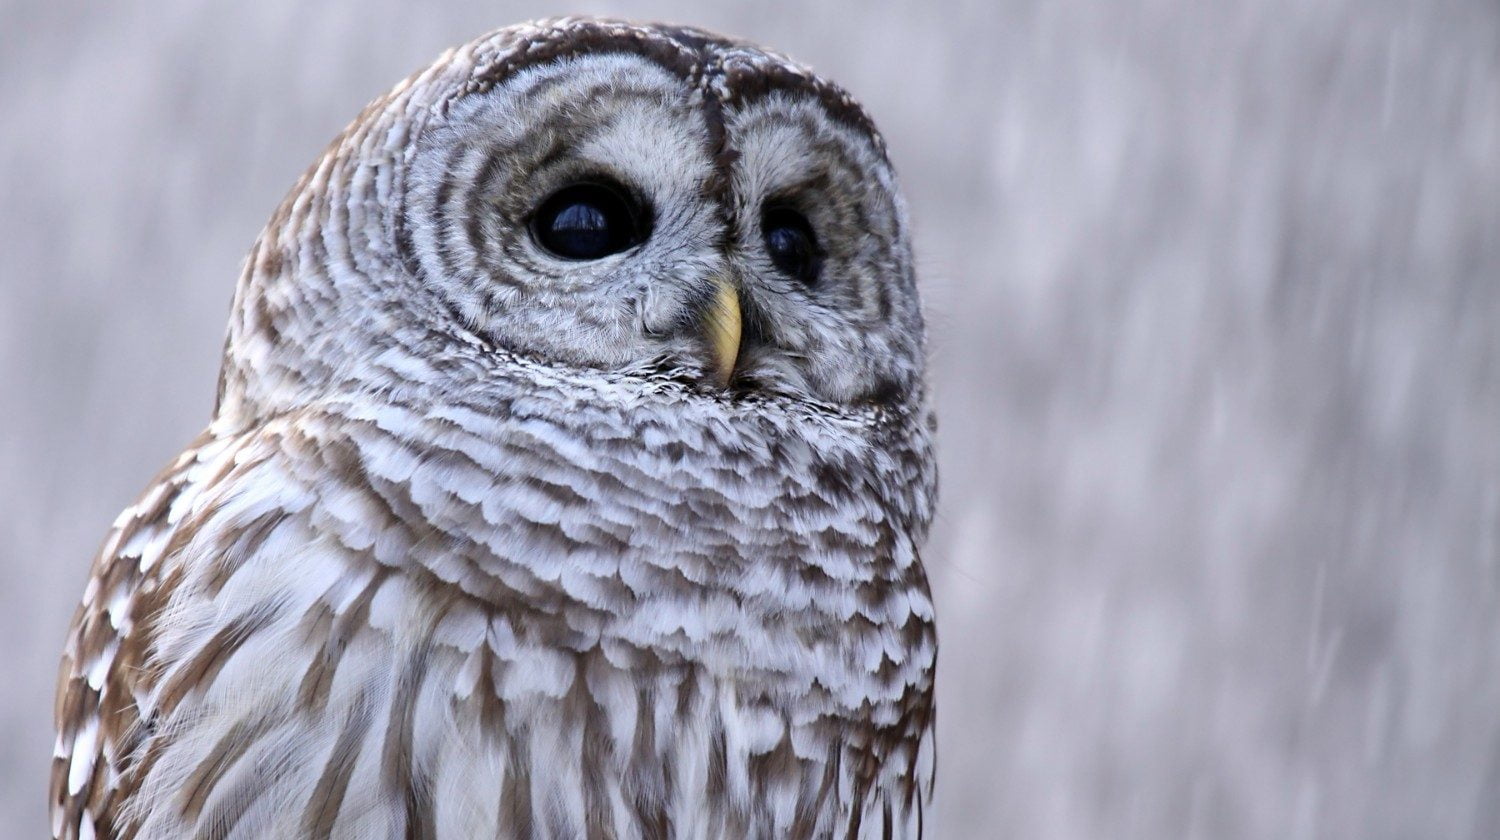 Close up of a white owl at Killdeer Plains Wildlife Area